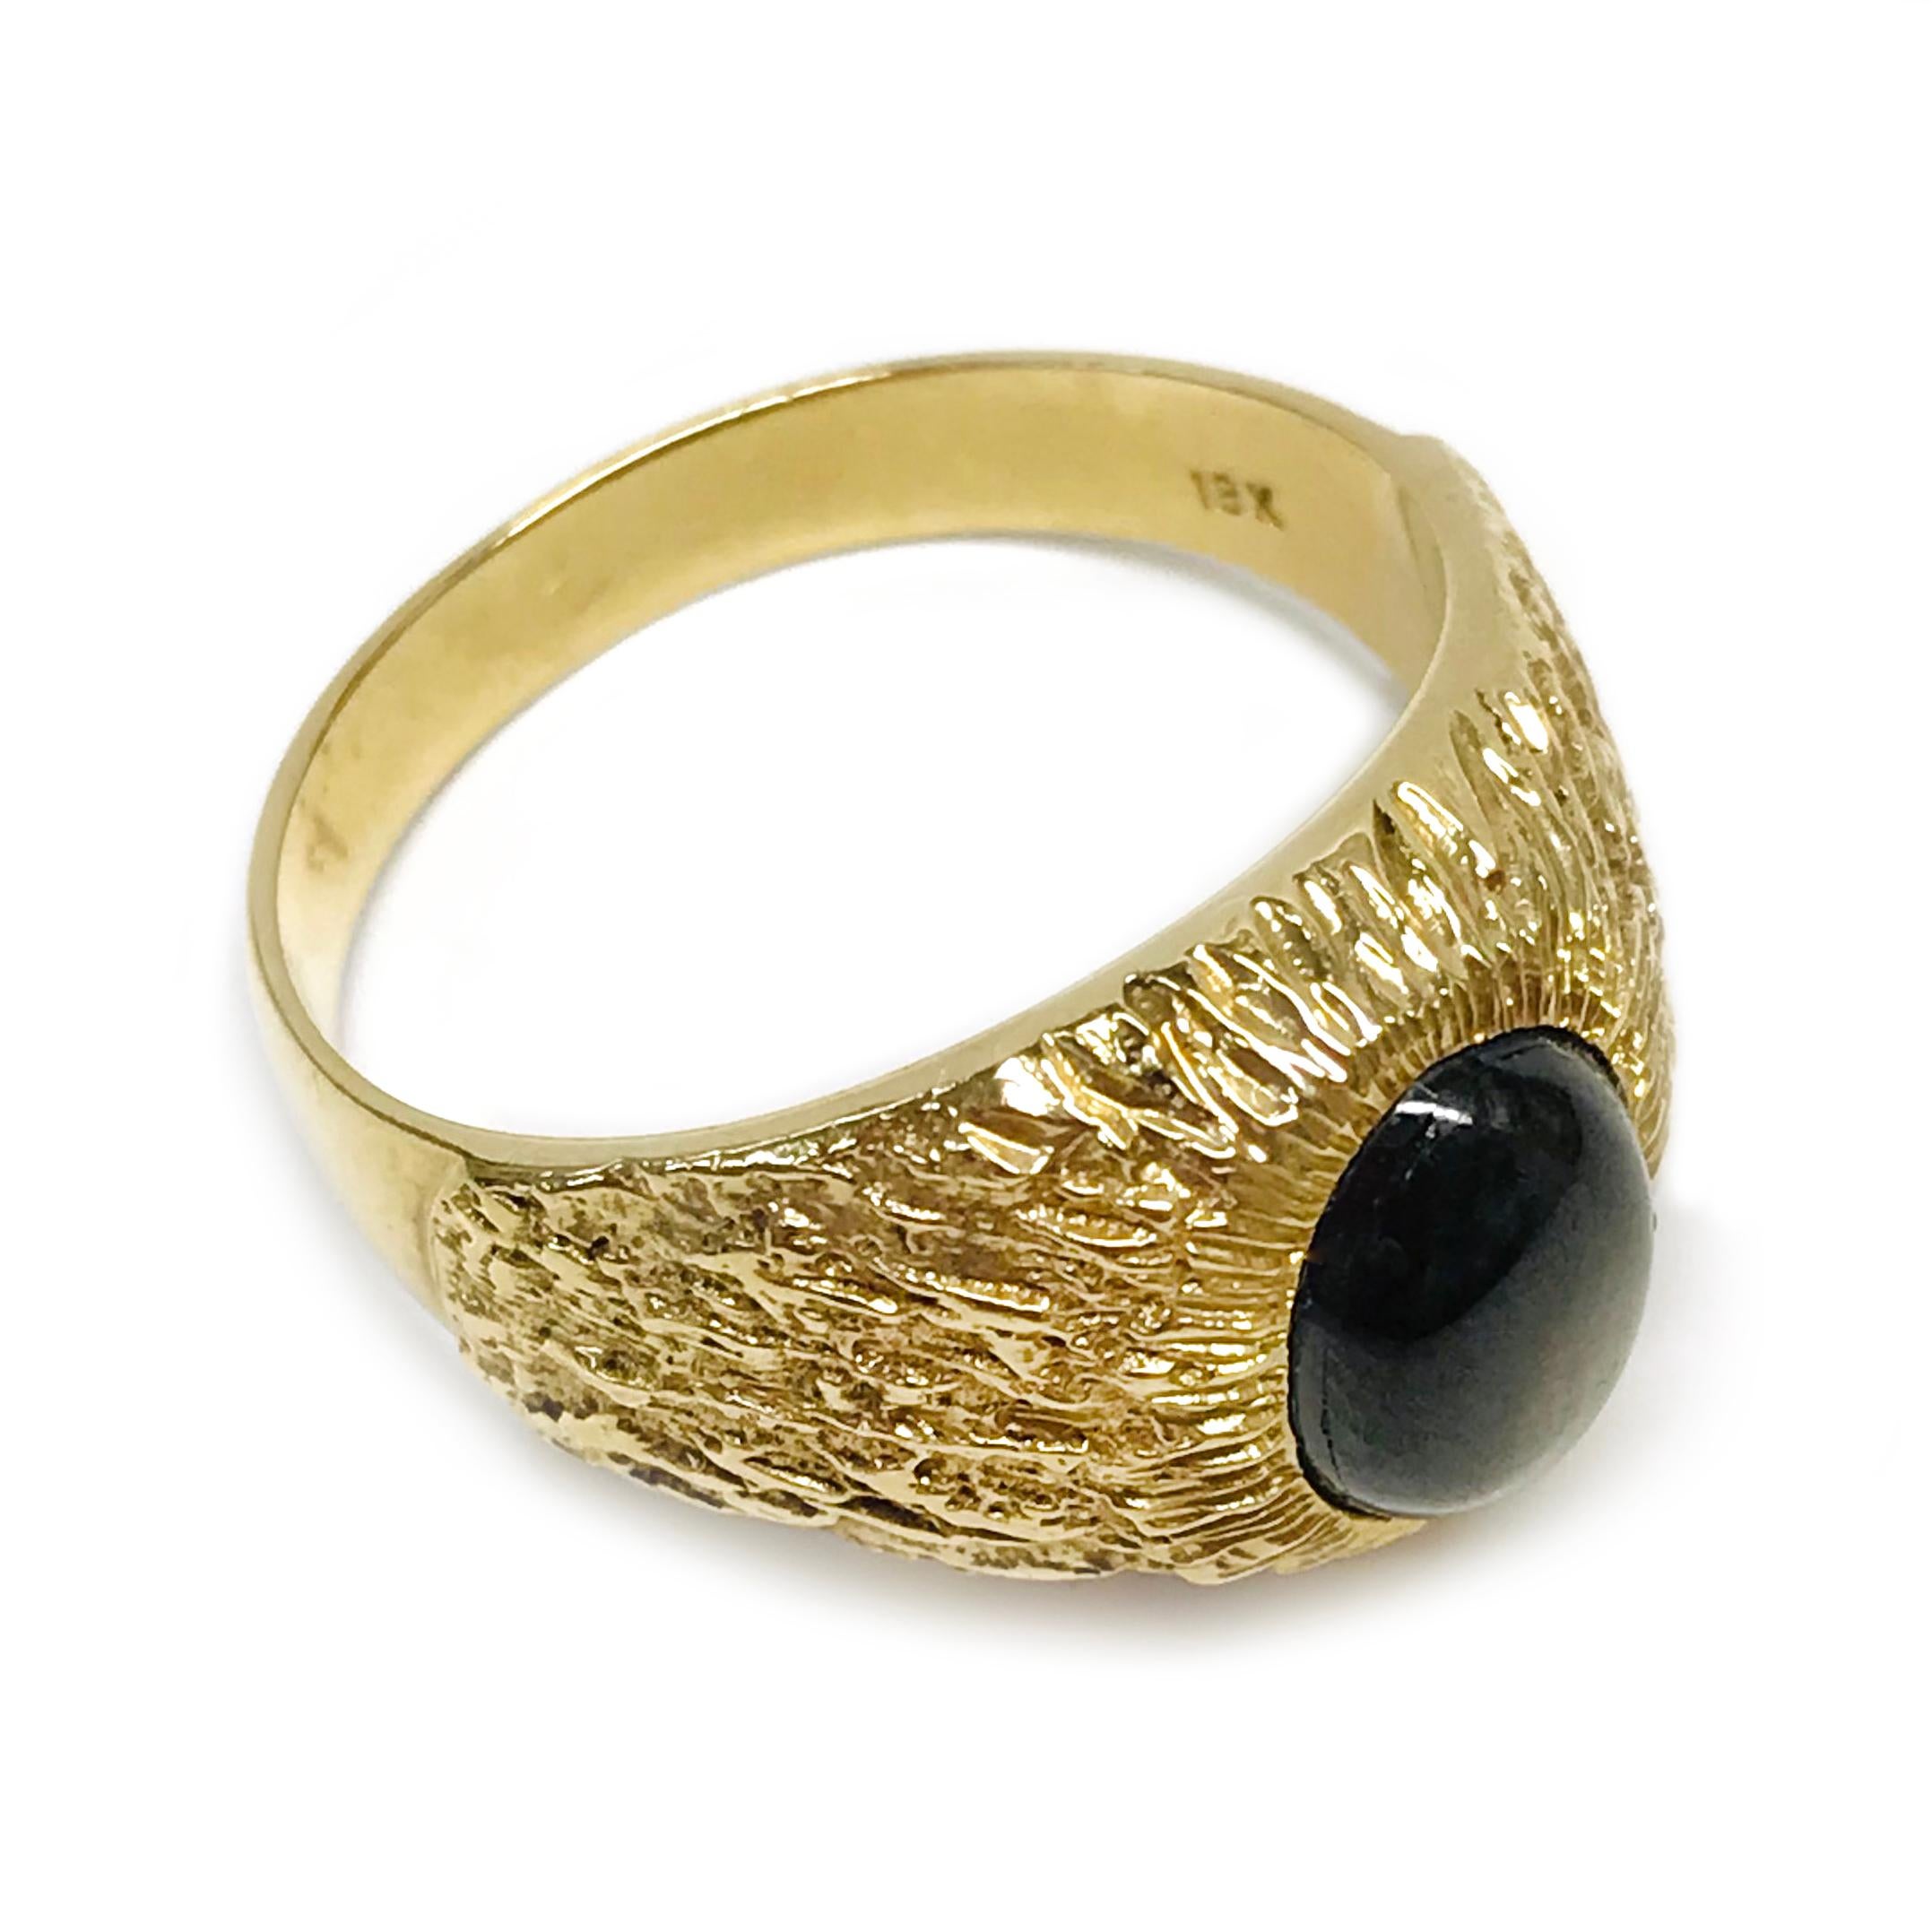 18 Karat Black Star Sapphire Ring. The ring features a bezel-set oval black star sapphire. The six-star sapphire is has good presence with light. The sapphire measures 9mm x 7mm and the ring size is 9 1/2. Approximately half of the ring band has a